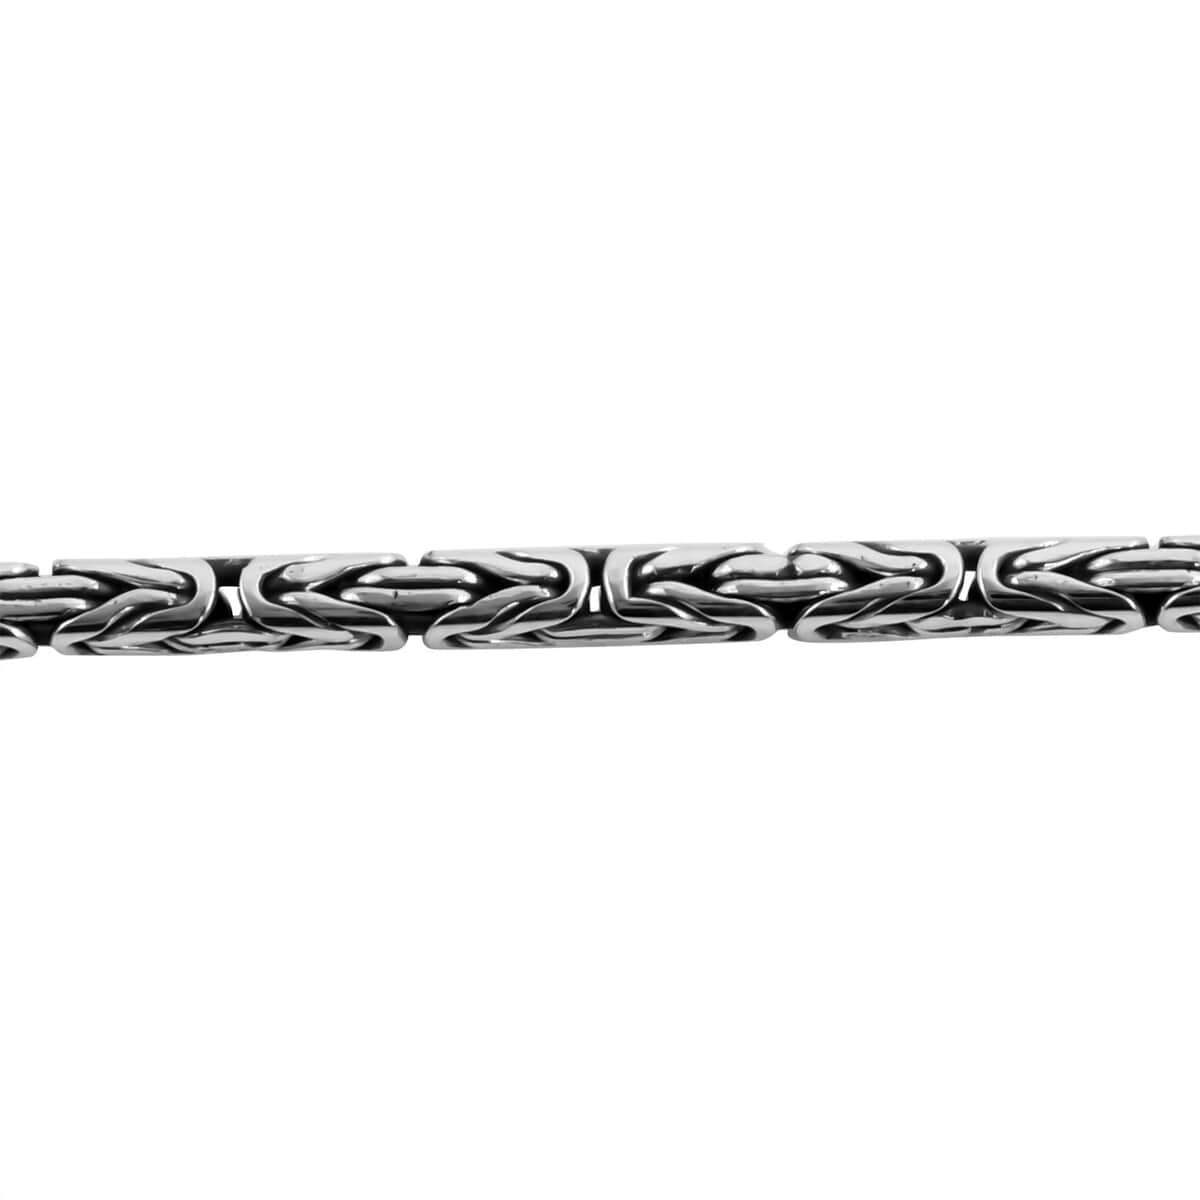 Bali Legacy Sterling Silver Borobudur Chain Necklace, Sterling Silver Necklace, Silver Jewelry, 22 Inch Chain Necklace 2.5mm 22.40 Grams image number 6